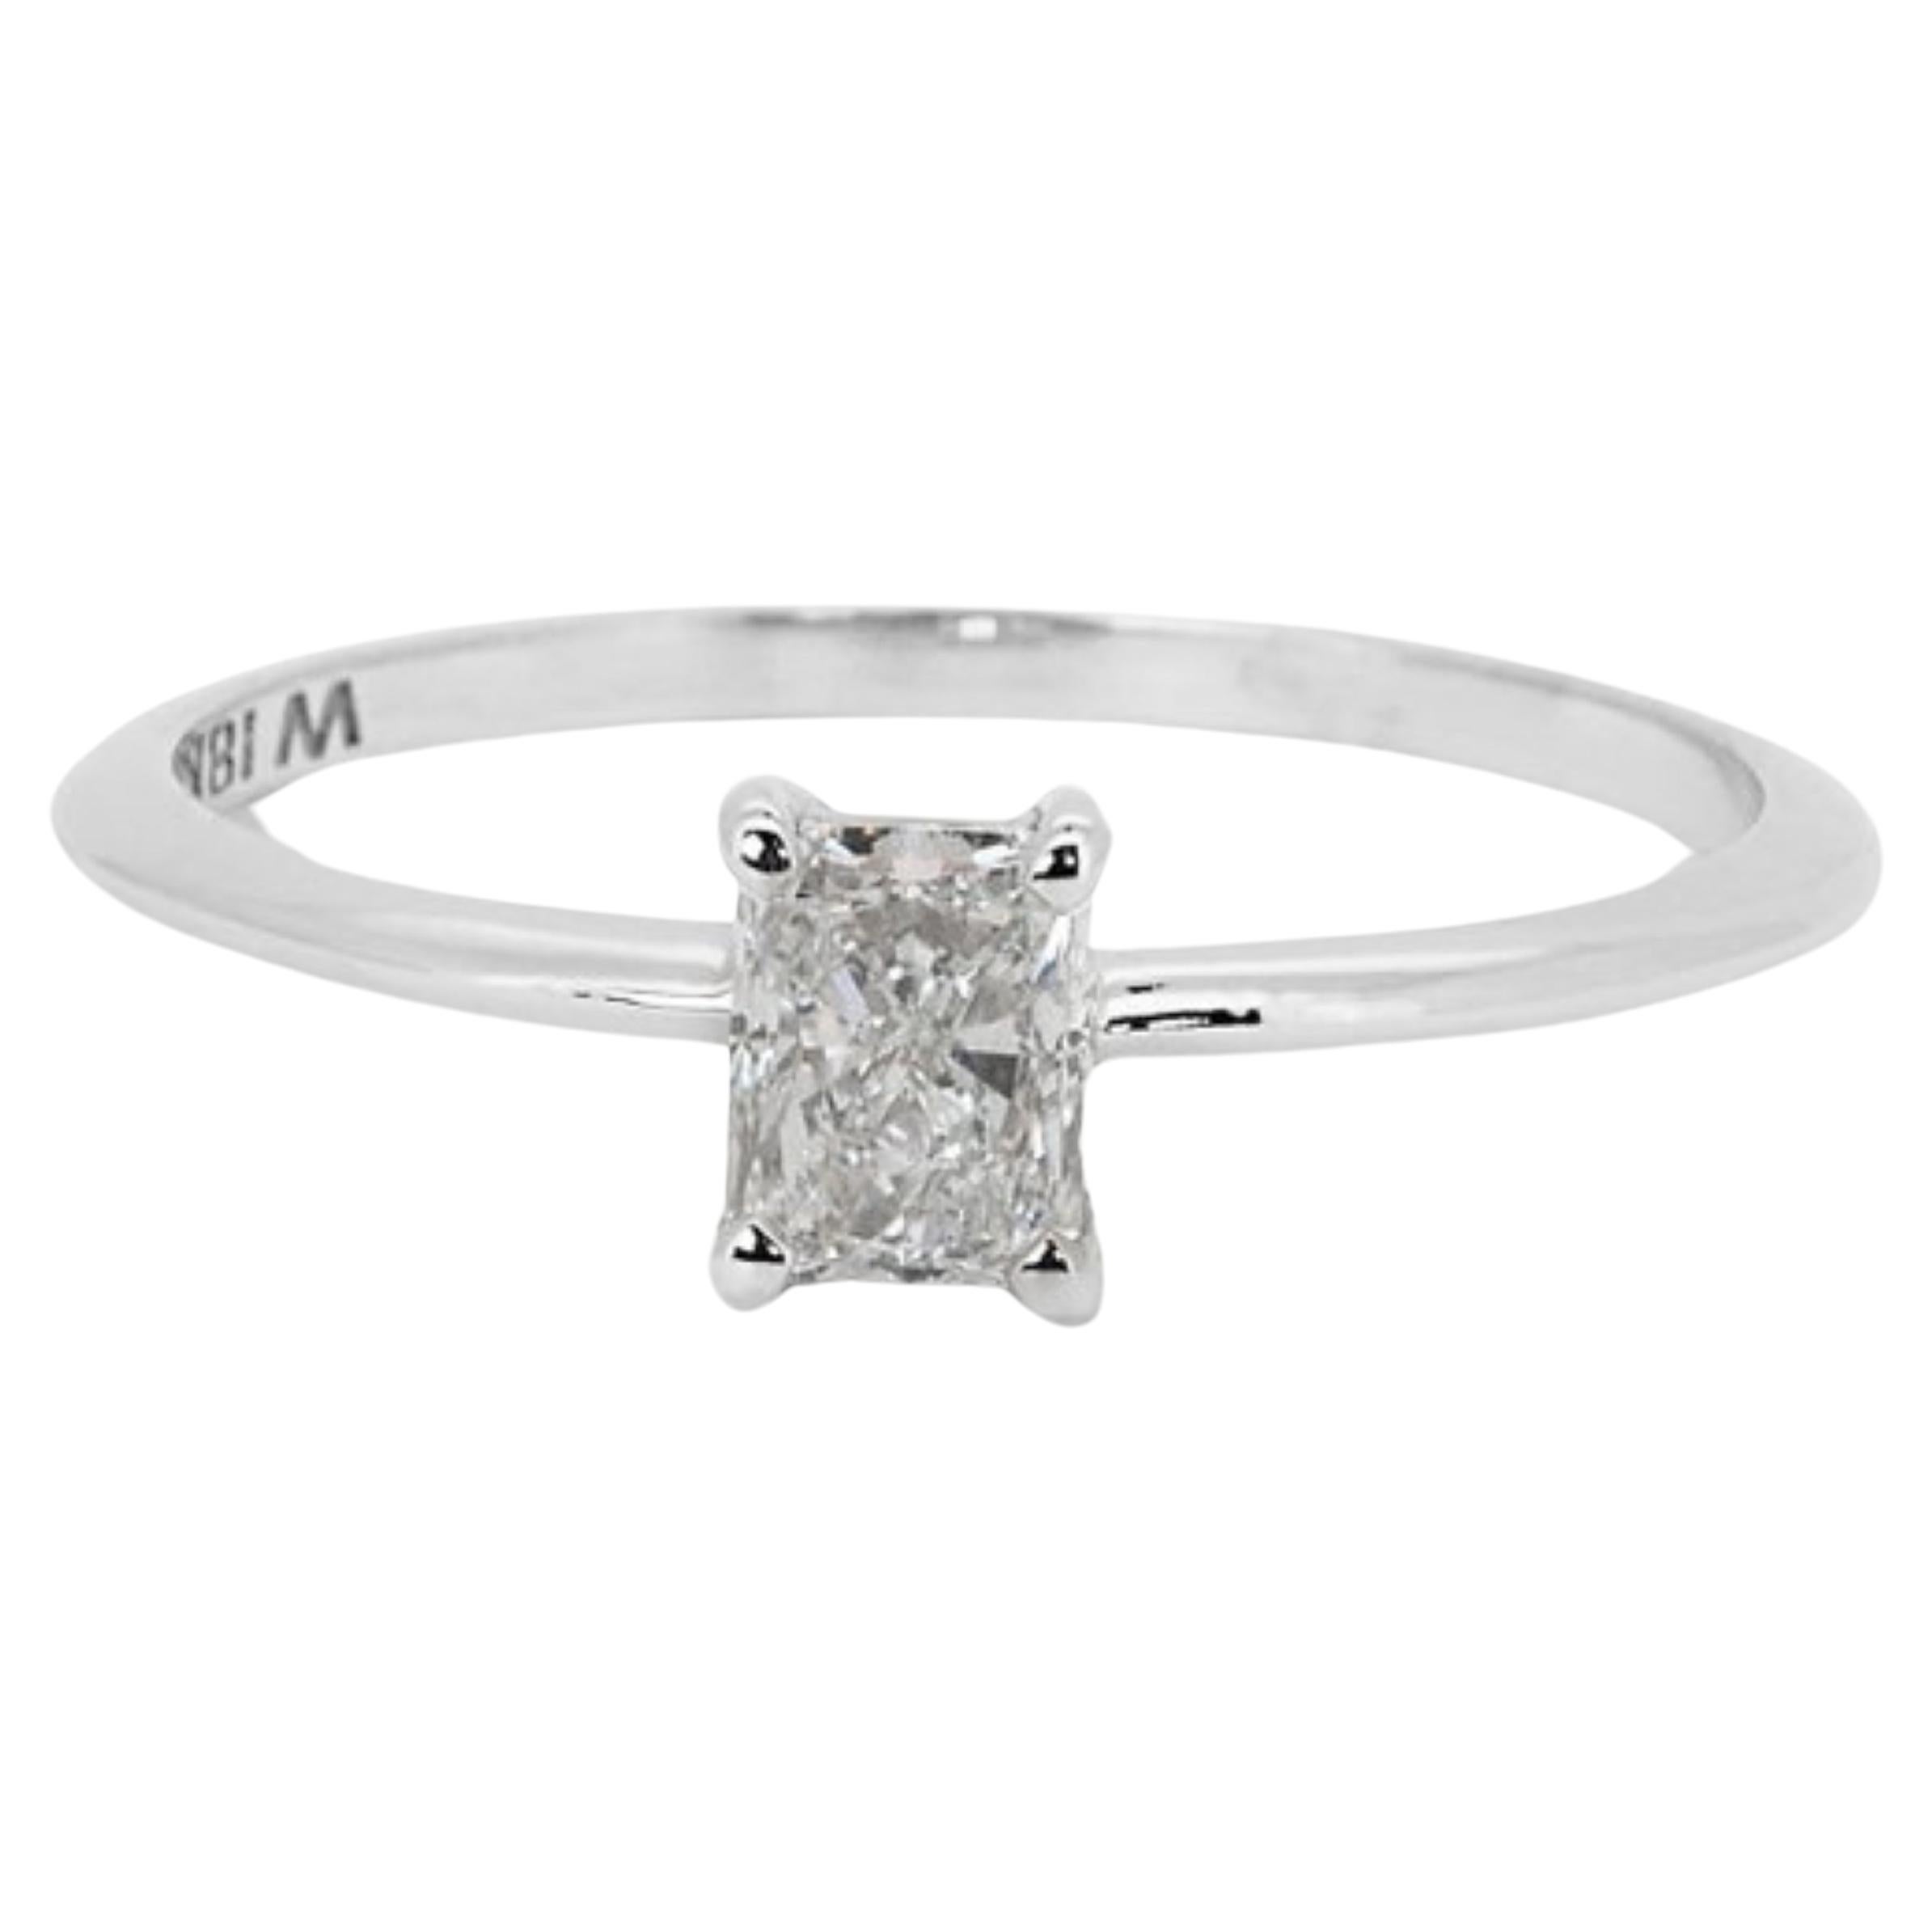 Sparkling solitaire ring with a dazzling 0.80-carat radiant natural diamond